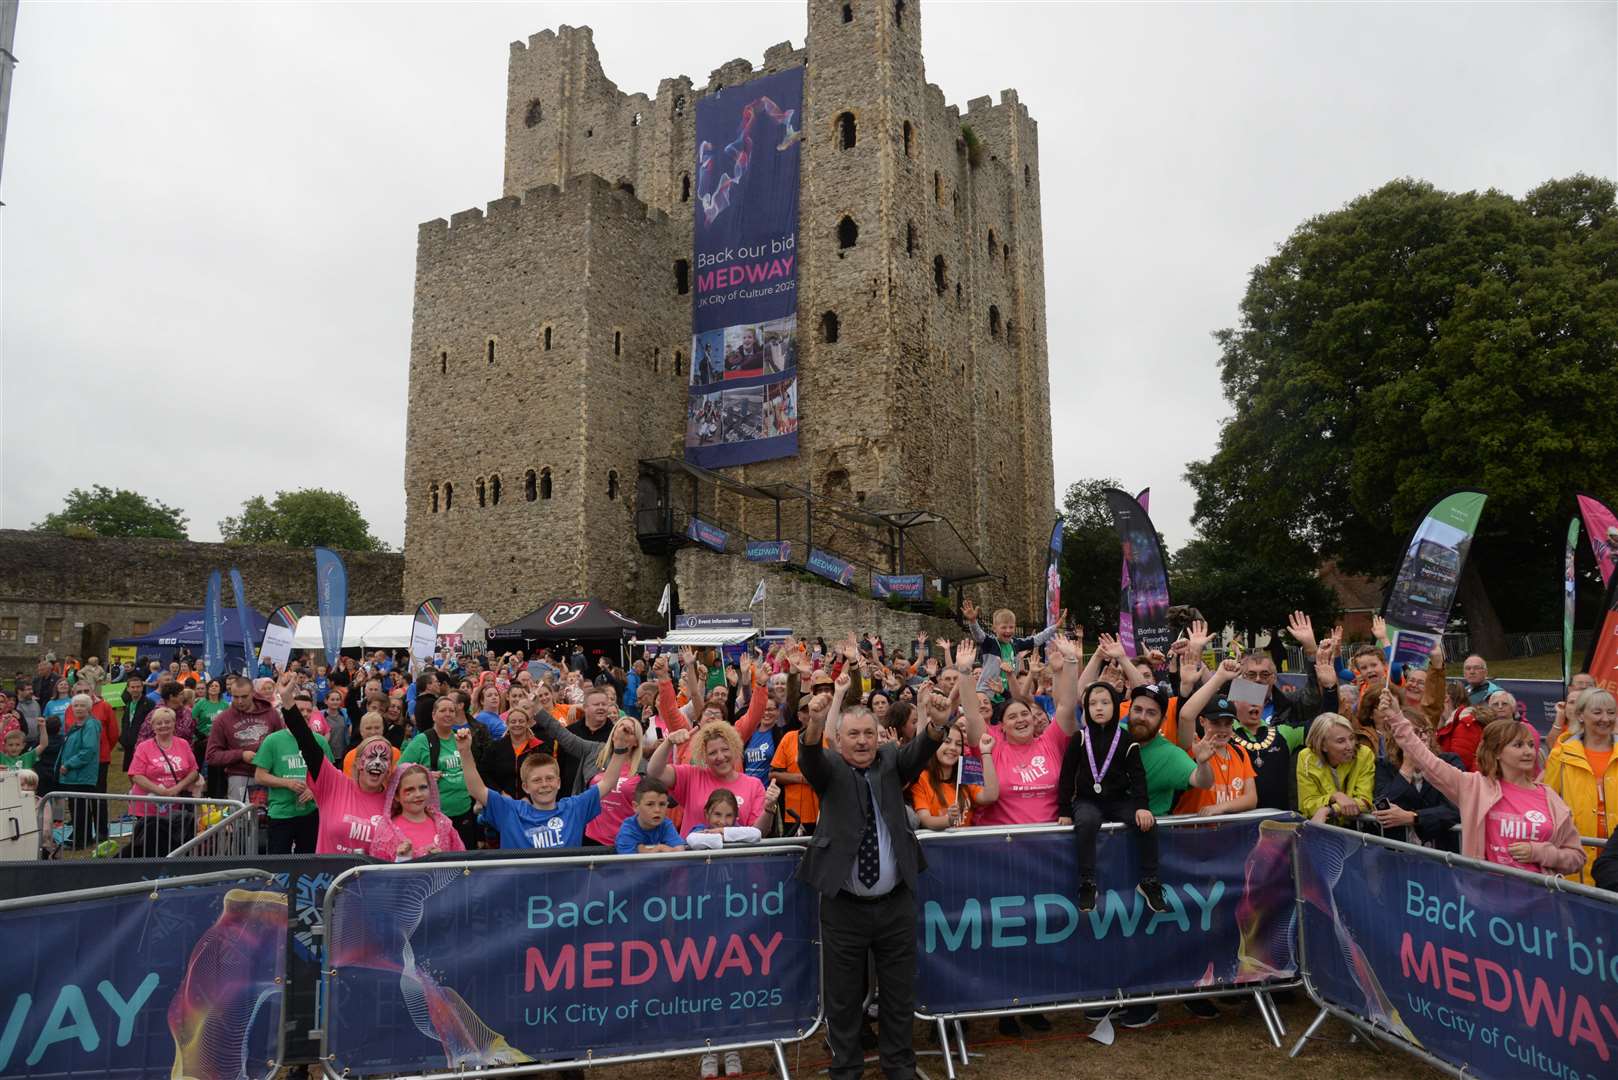 The last Medway Mile event at Rochester Castle in 2019 which saw the launch of the council's City of Culture bid. Picture: Chris Davey